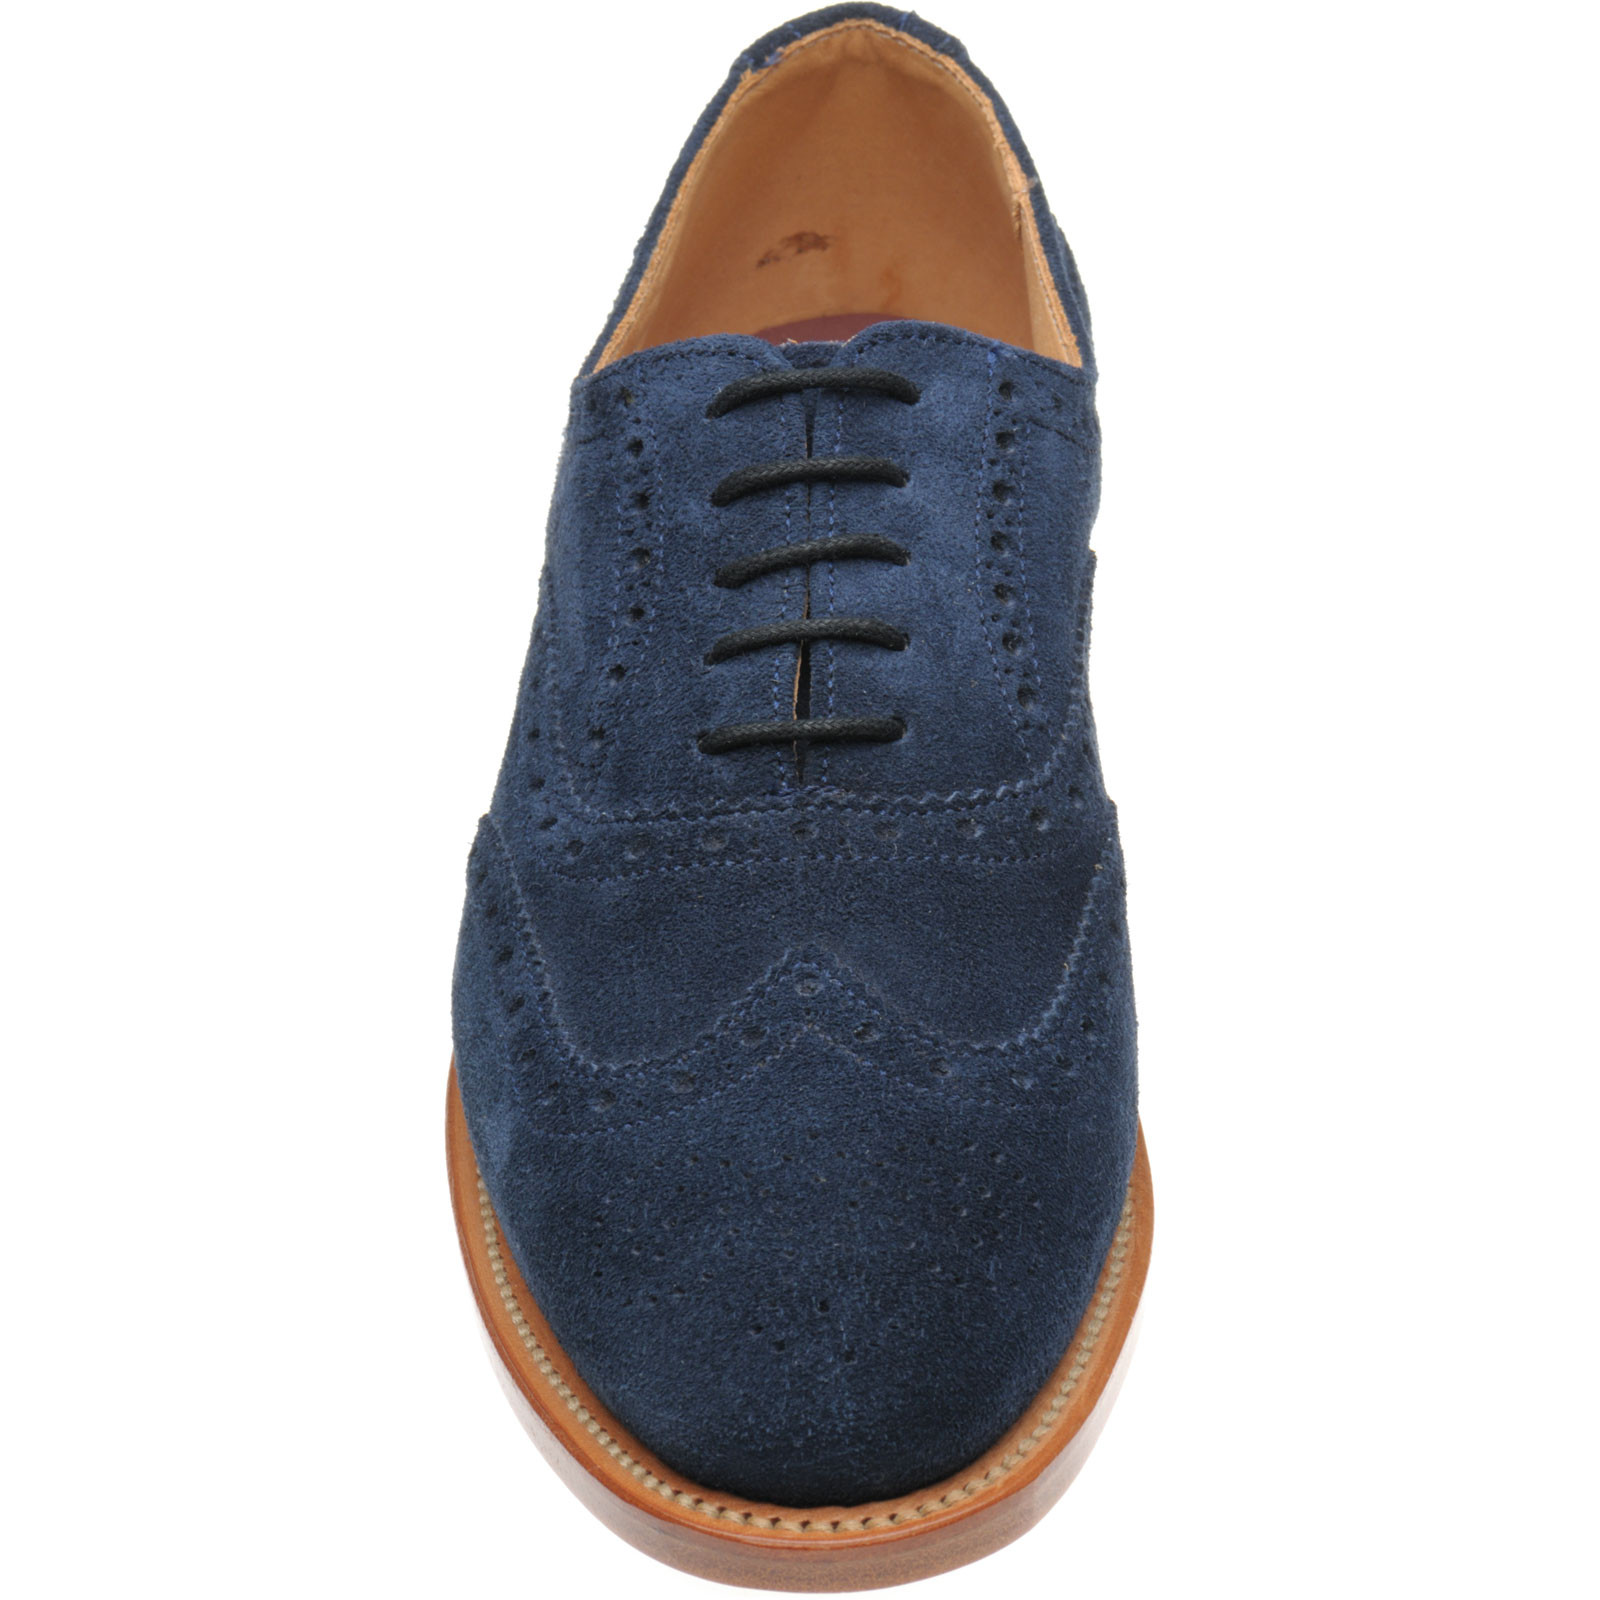 NPS shoes | NPS Sale | Charlotte ladies brogues in Midnight Blue Suede ...